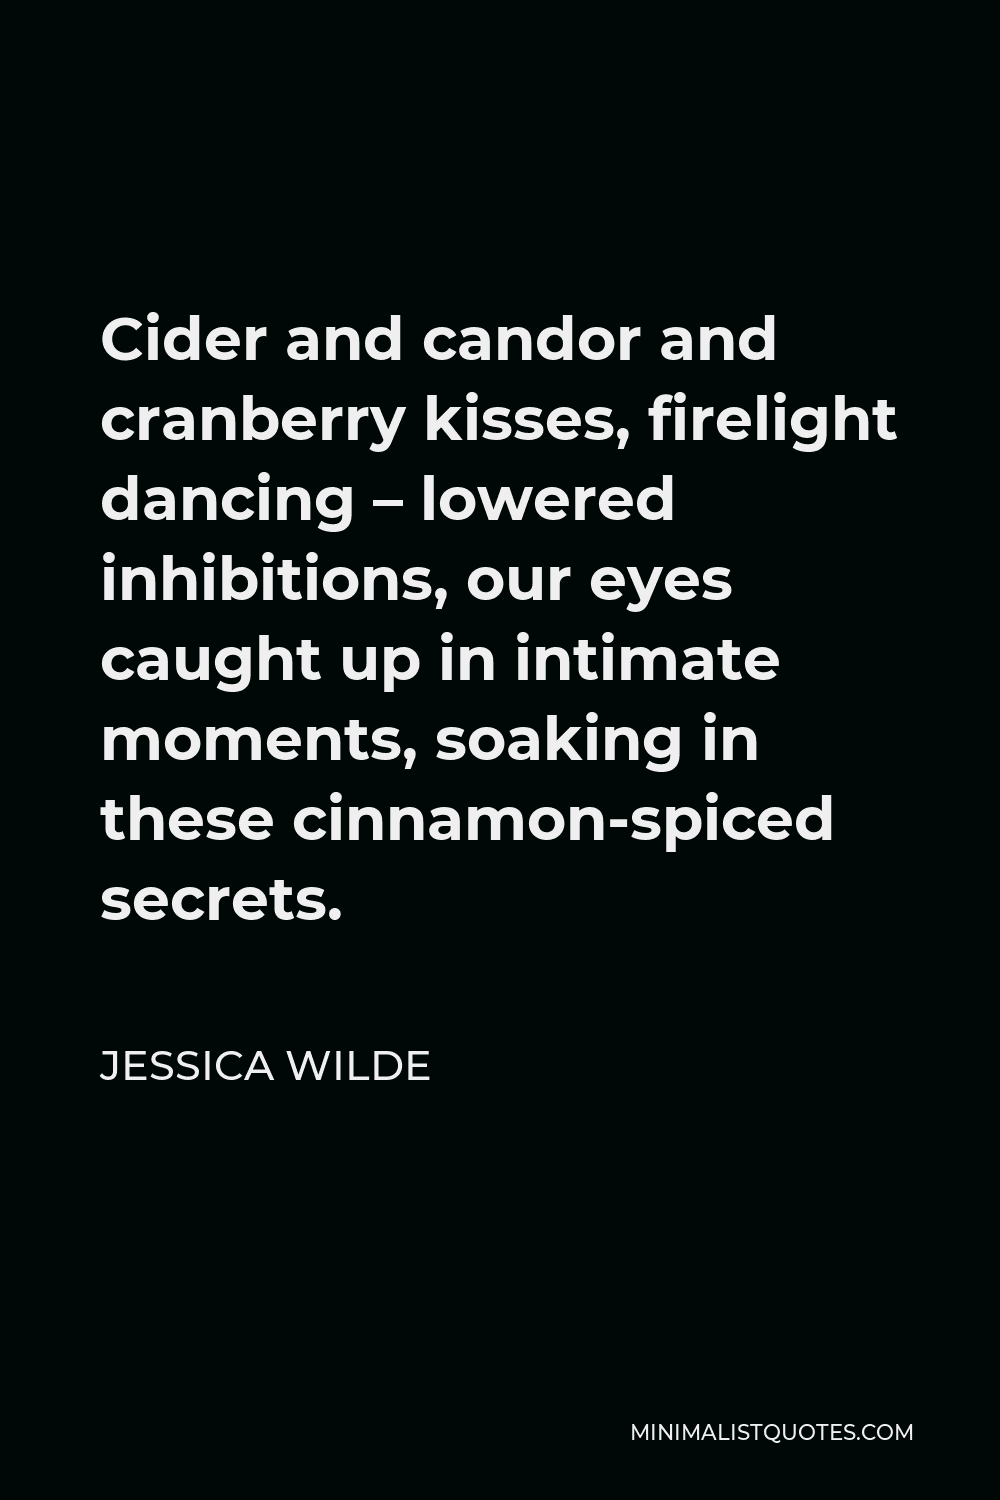 Jessica Wilde Quote - Cider and candor and cranberry kisses, firelight dancing – lowered inhibitions, our eyes caught up in intimate moments, soaking in these cinnamon-spiced secrets.